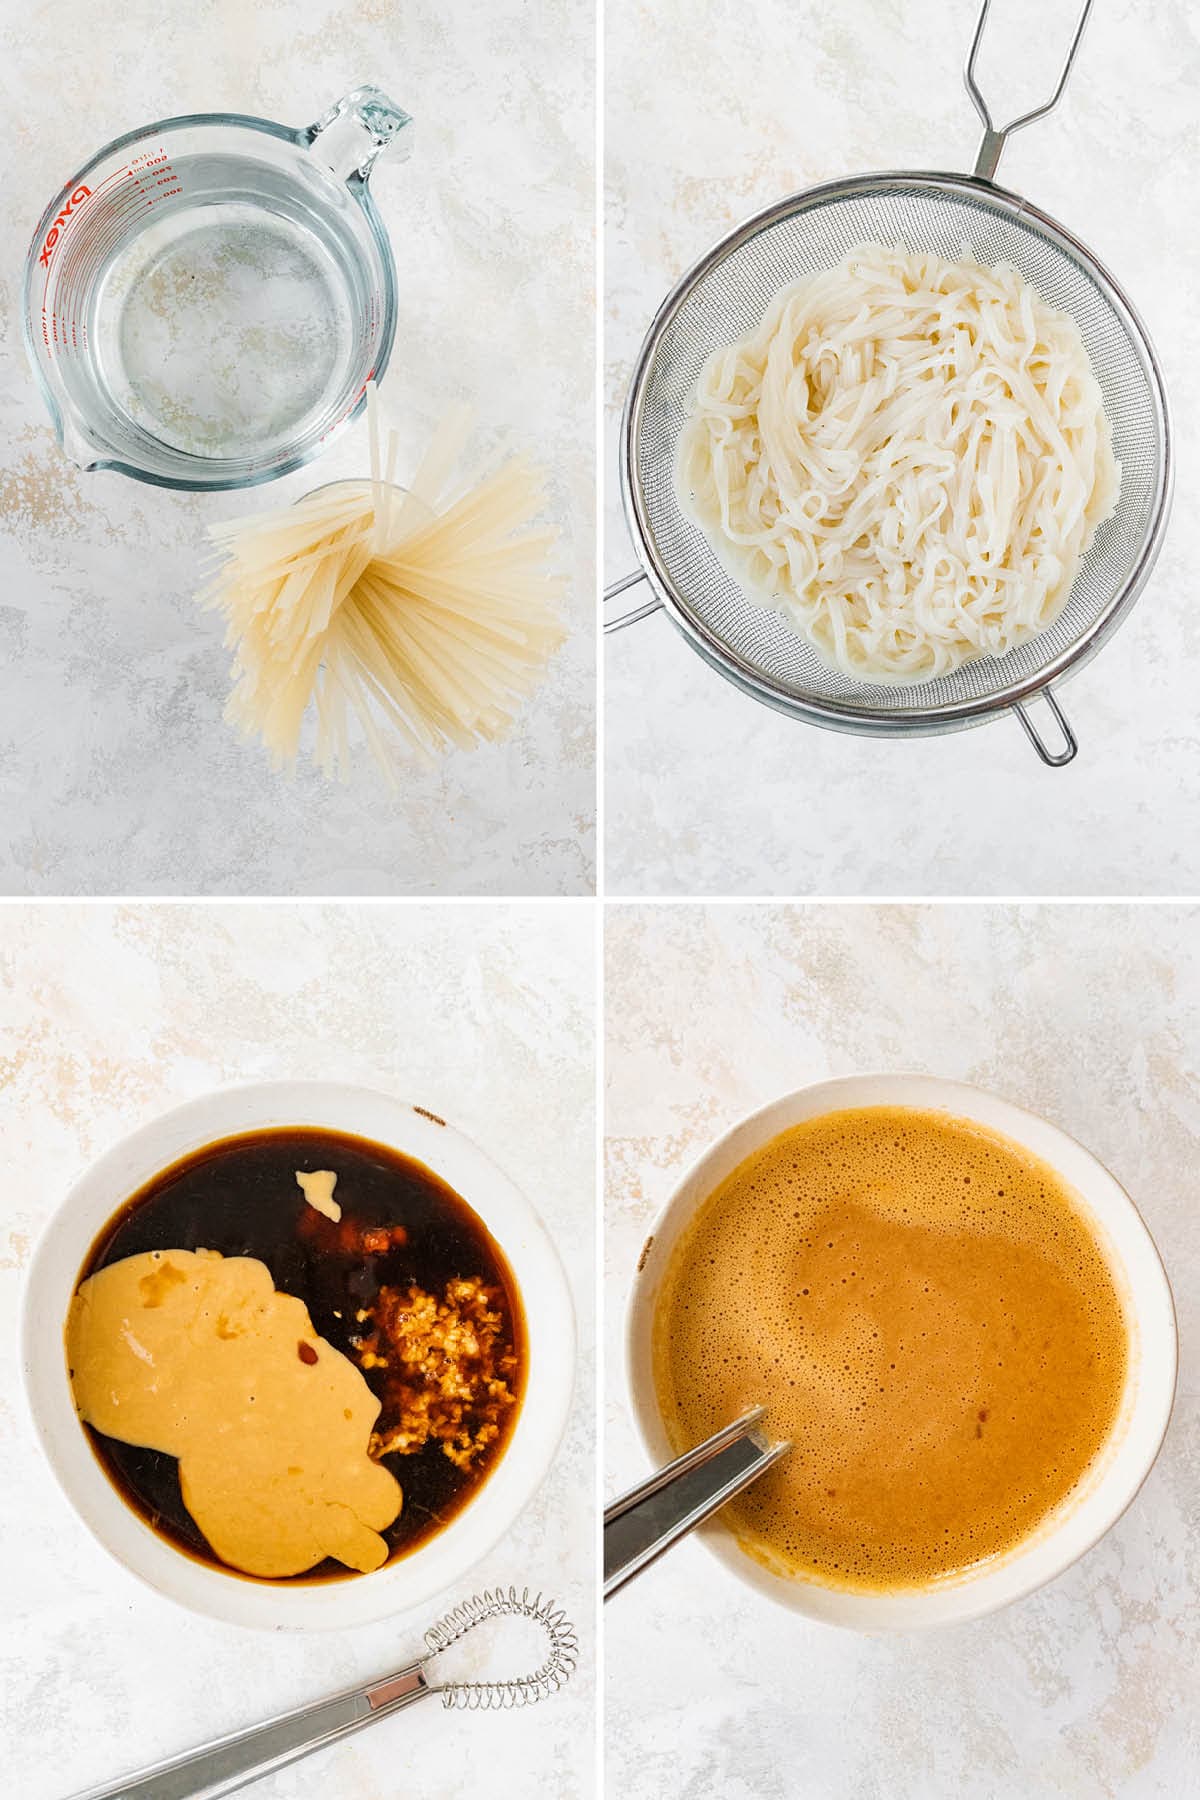 Collage of four photos showing rice noodles before and after being cooked, and the ingredients for an Asian tahini sauce, before and after being whisked together.